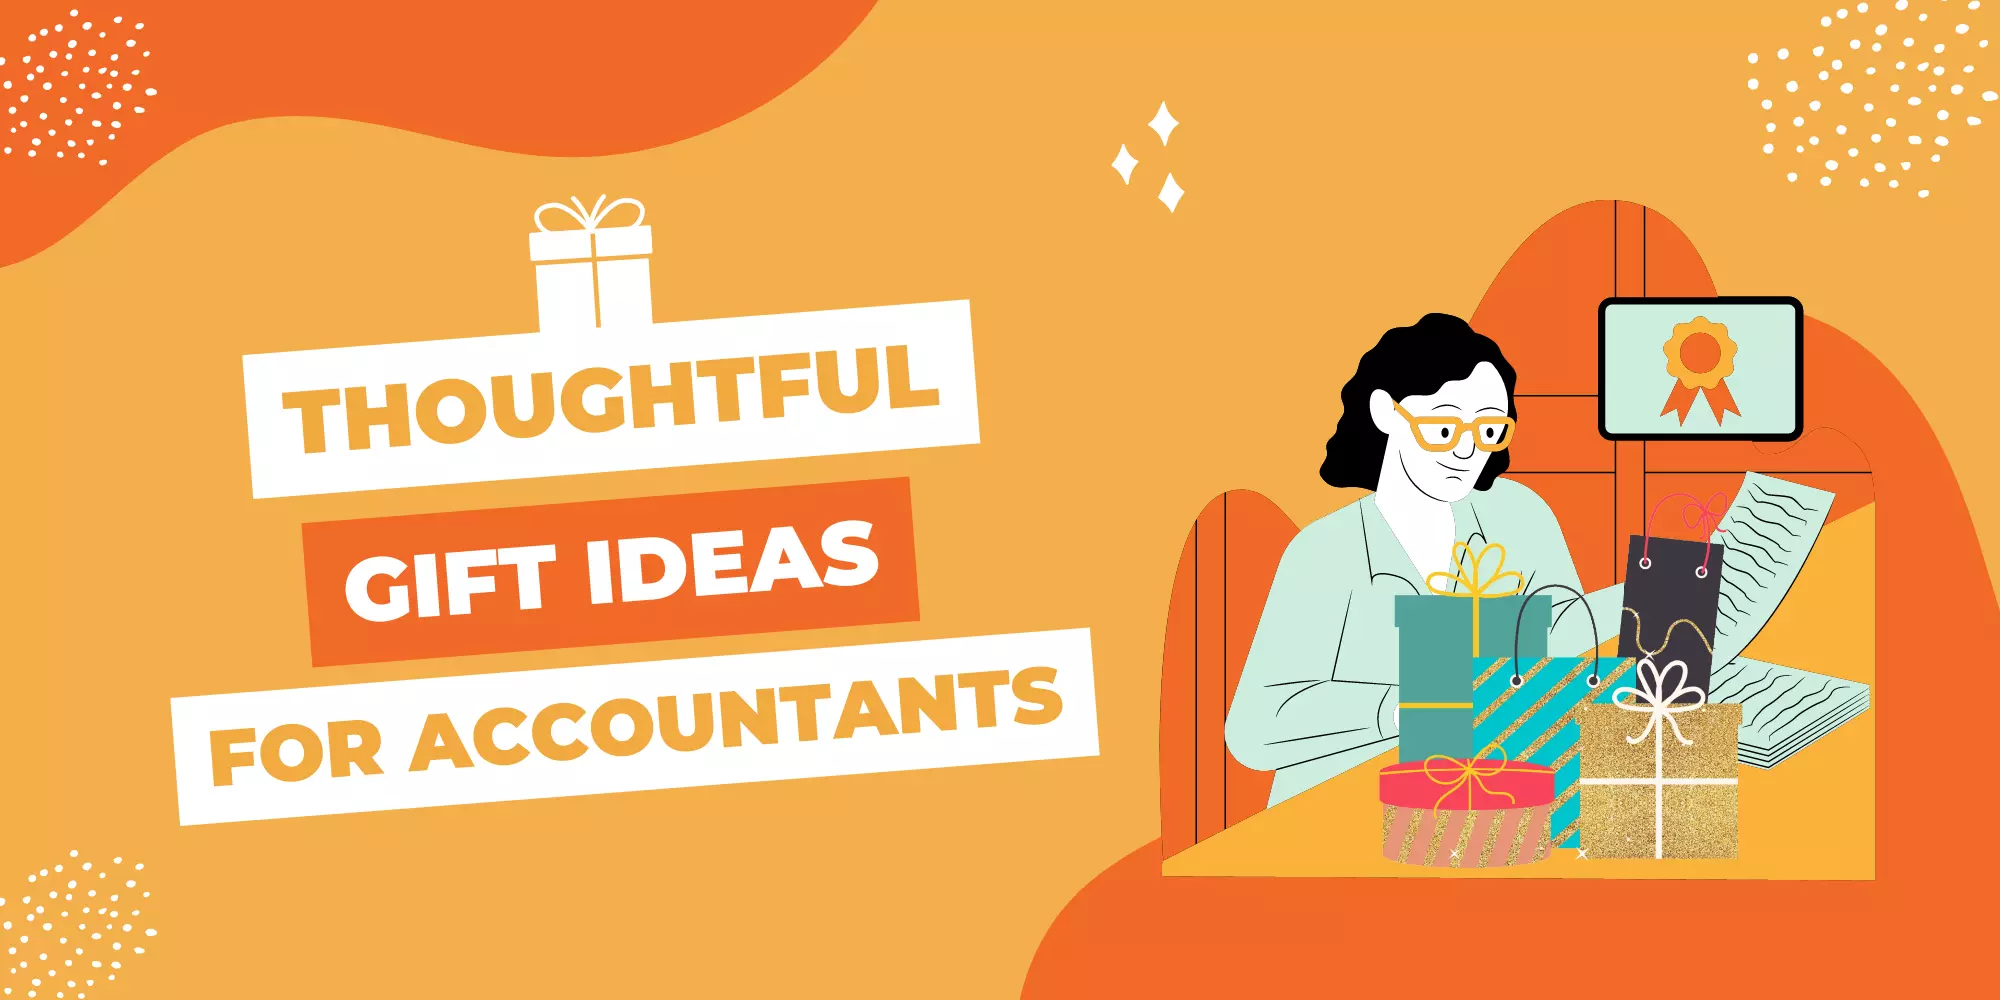 Thoughtful Gift Ideas for Accountants